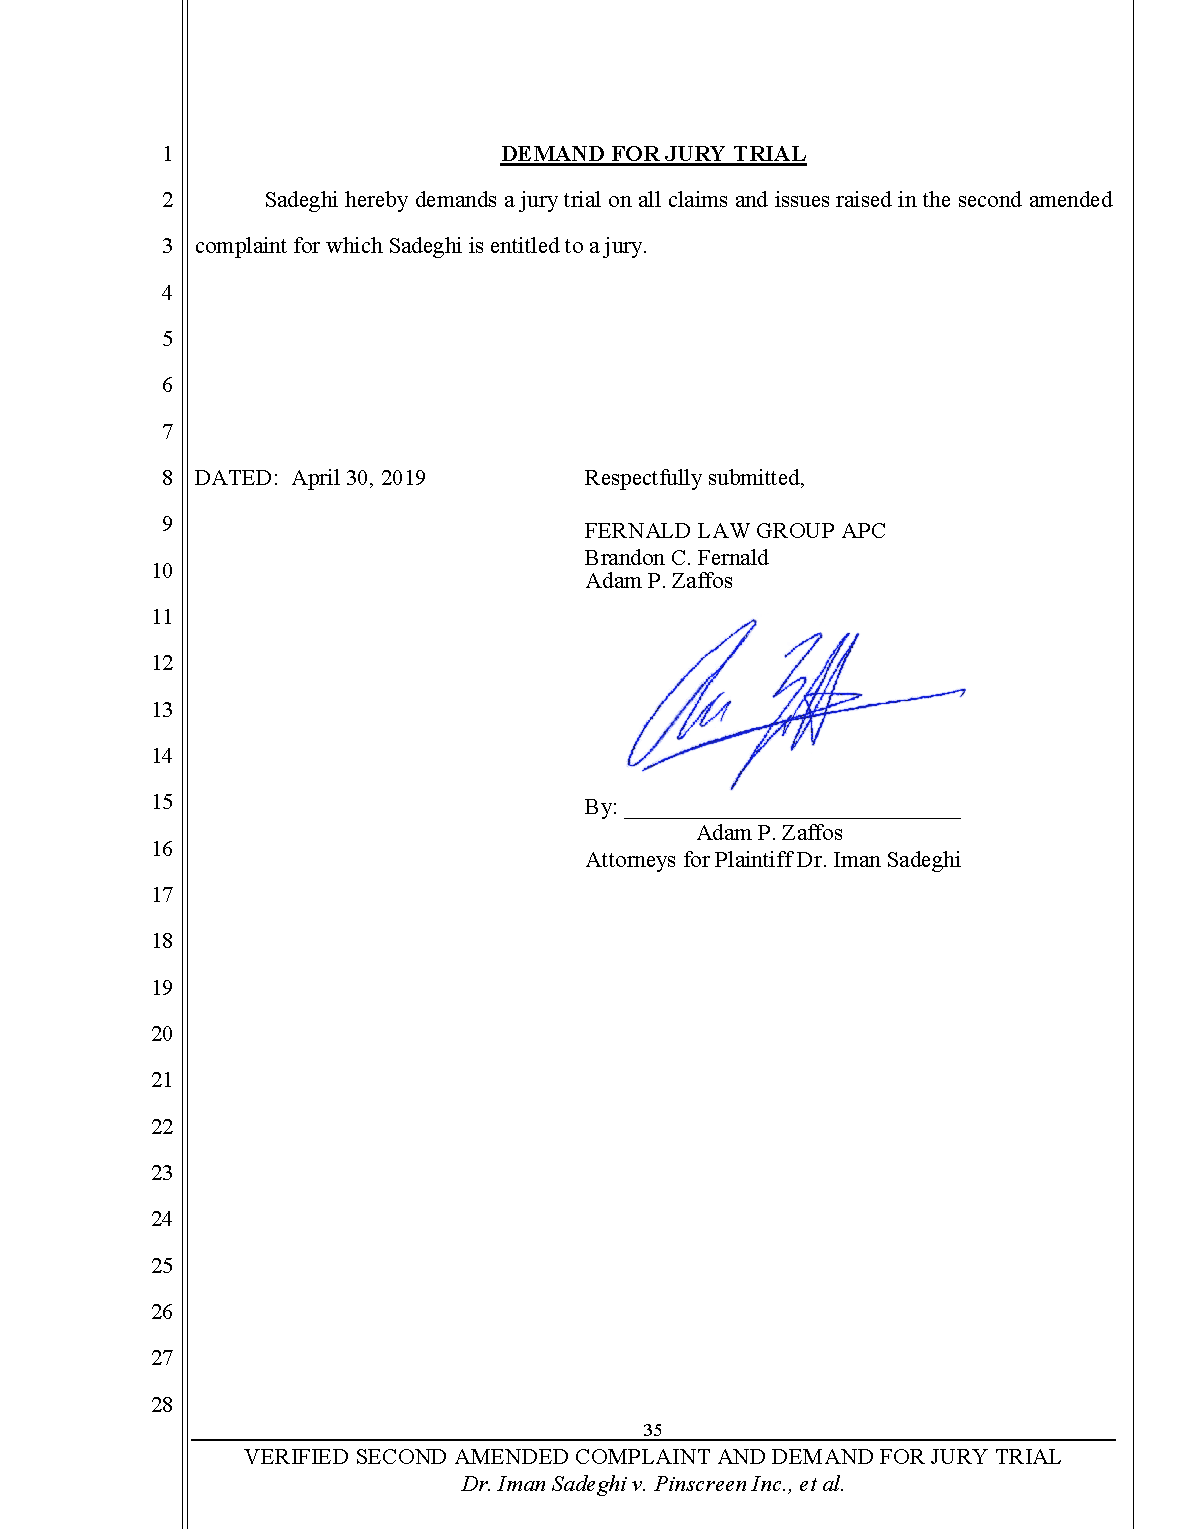 Second Amended Complaint (SAC) Page 36